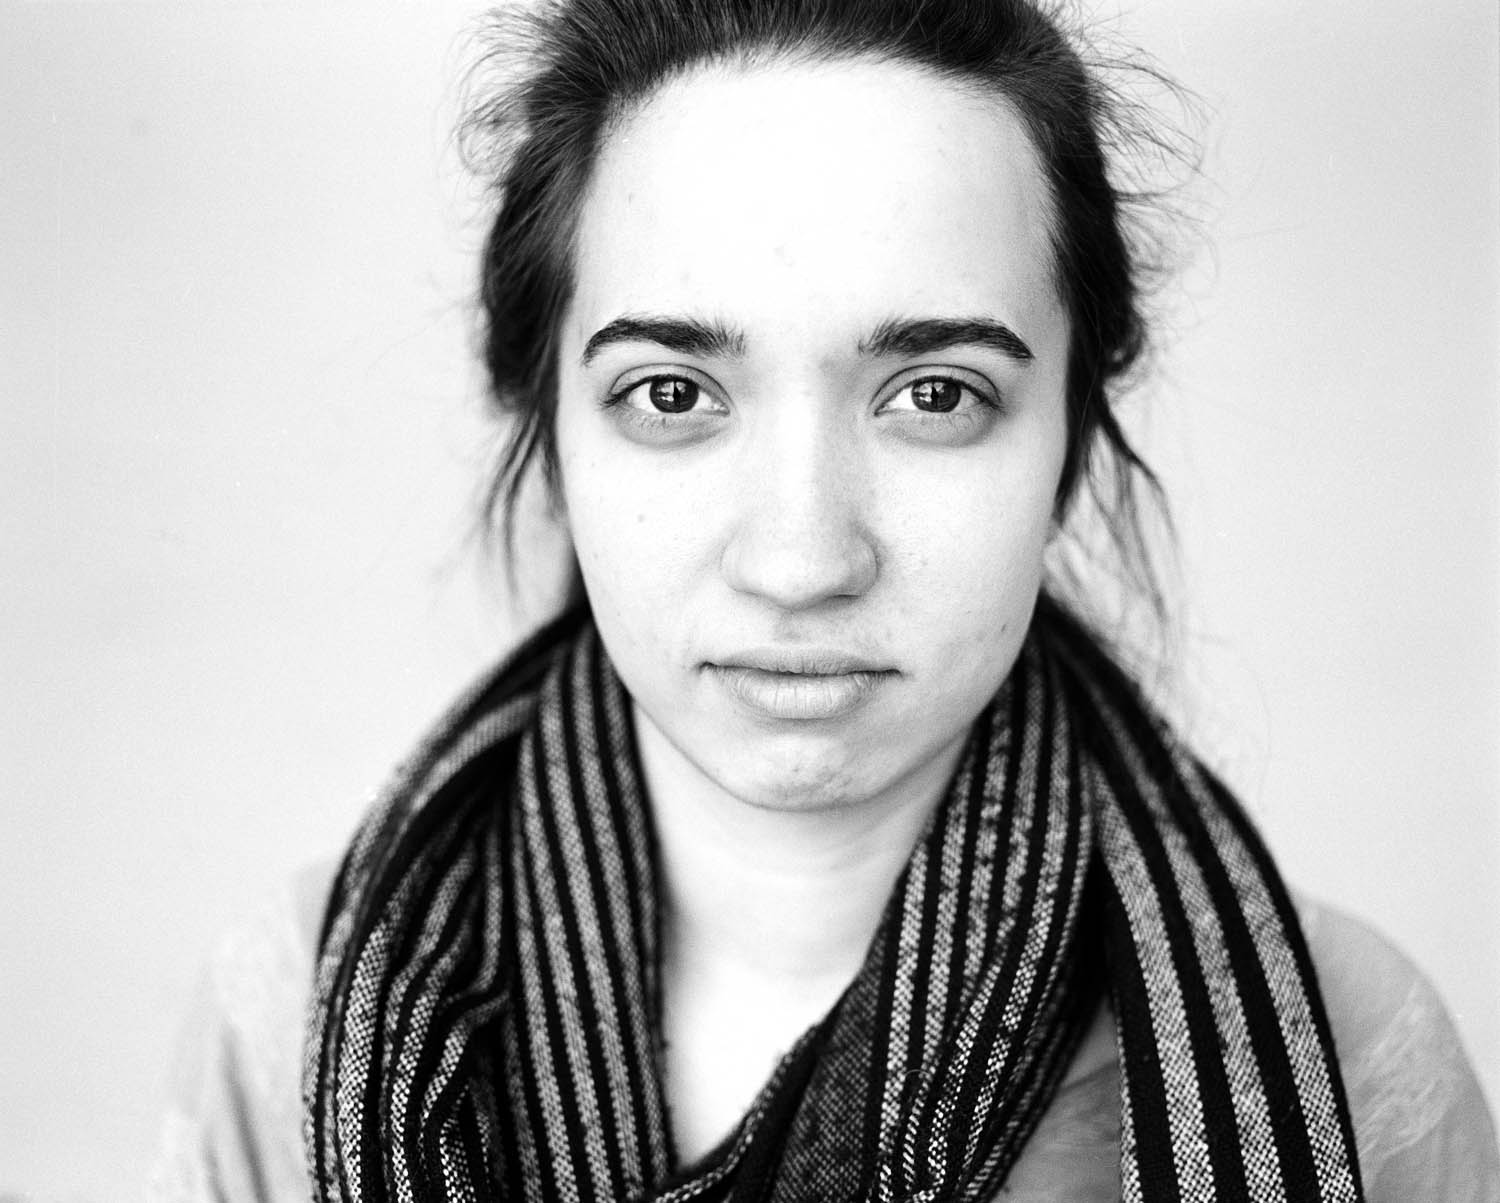 Black and white headshot portrait of a girl against a white background. Photographed with a Mamiya RB67